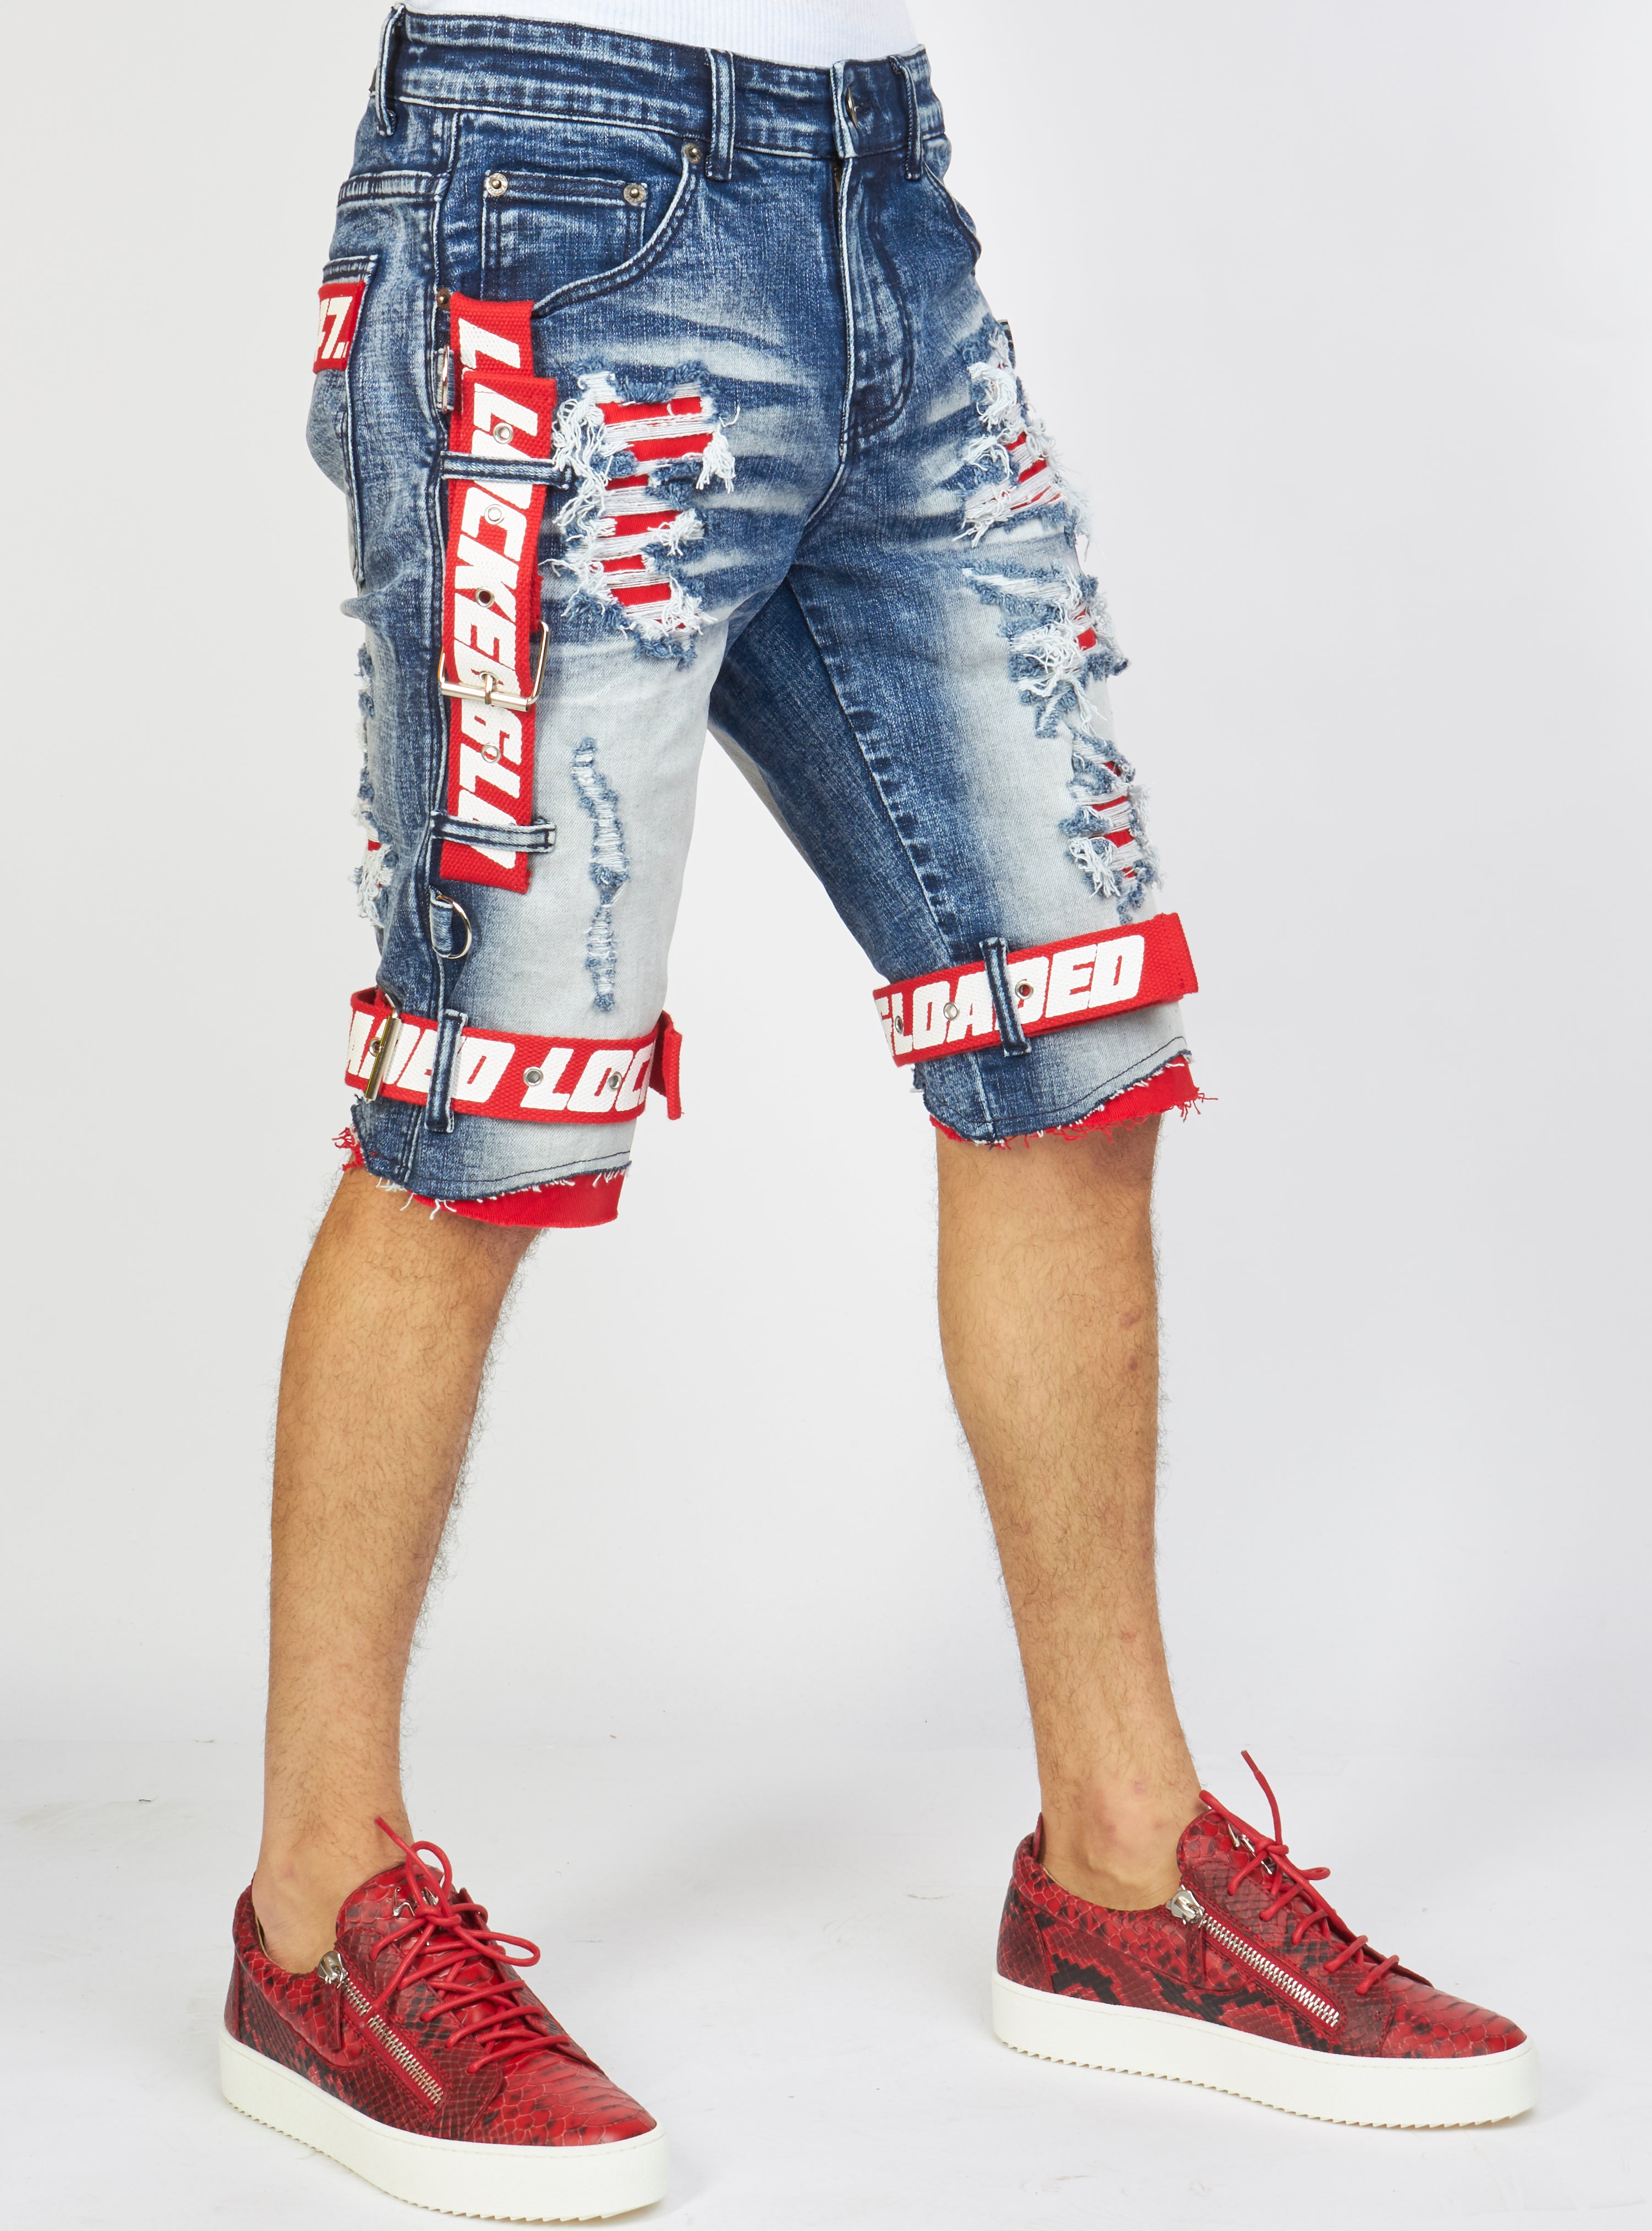 Locked & Loaded Shorts - Strapped Denim - Medium Blue with Red and White - LDS421101